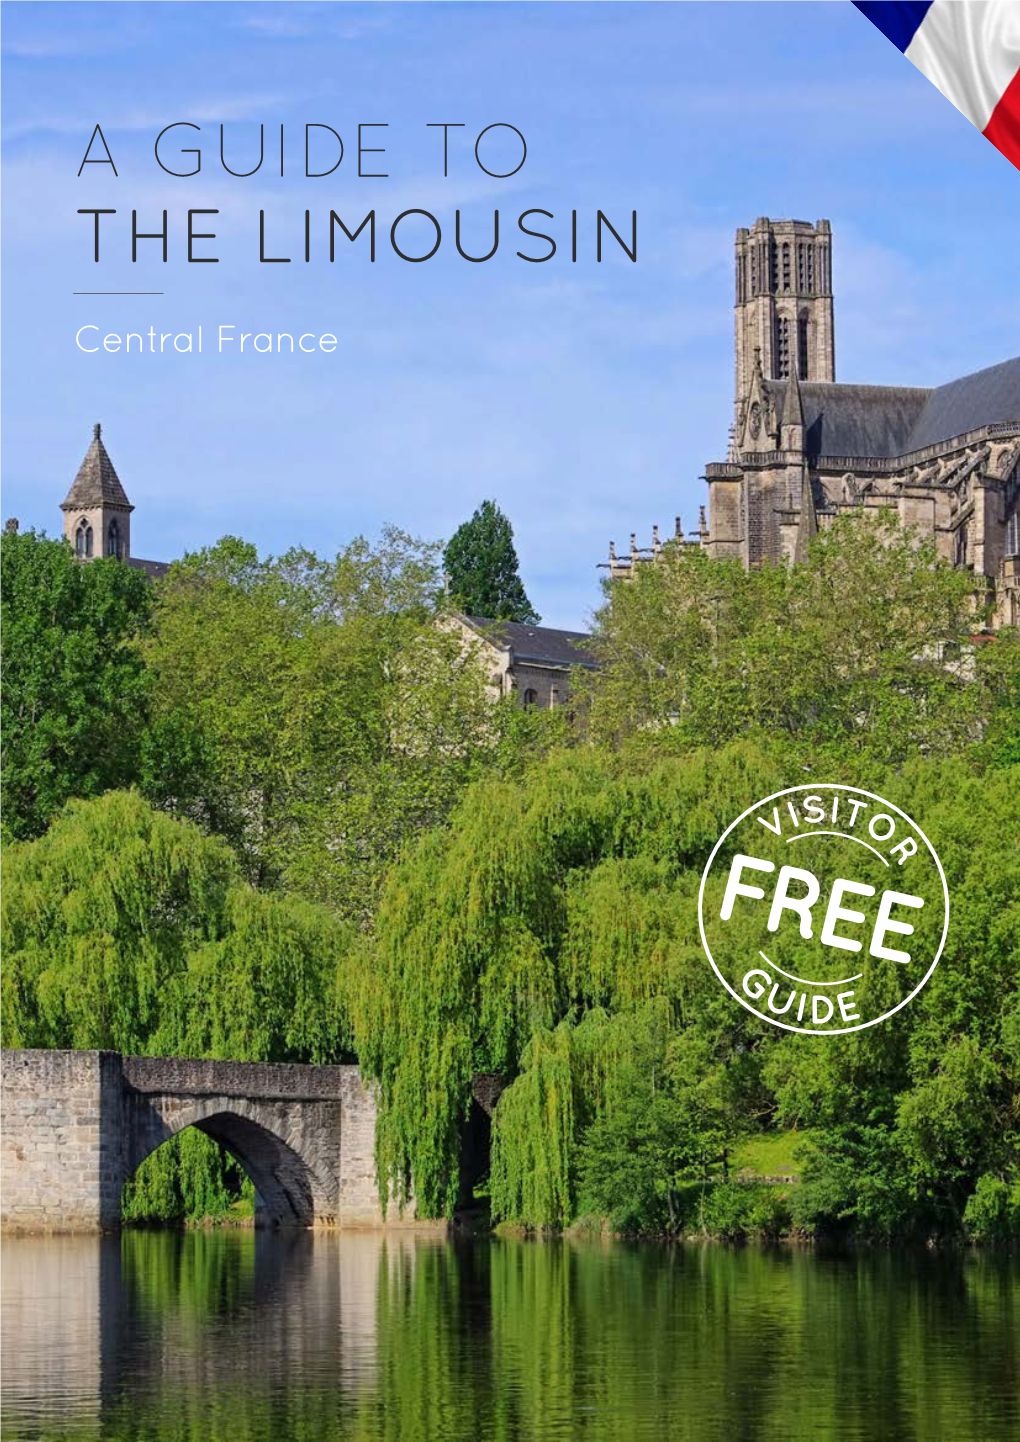 A Guide to the Limousin